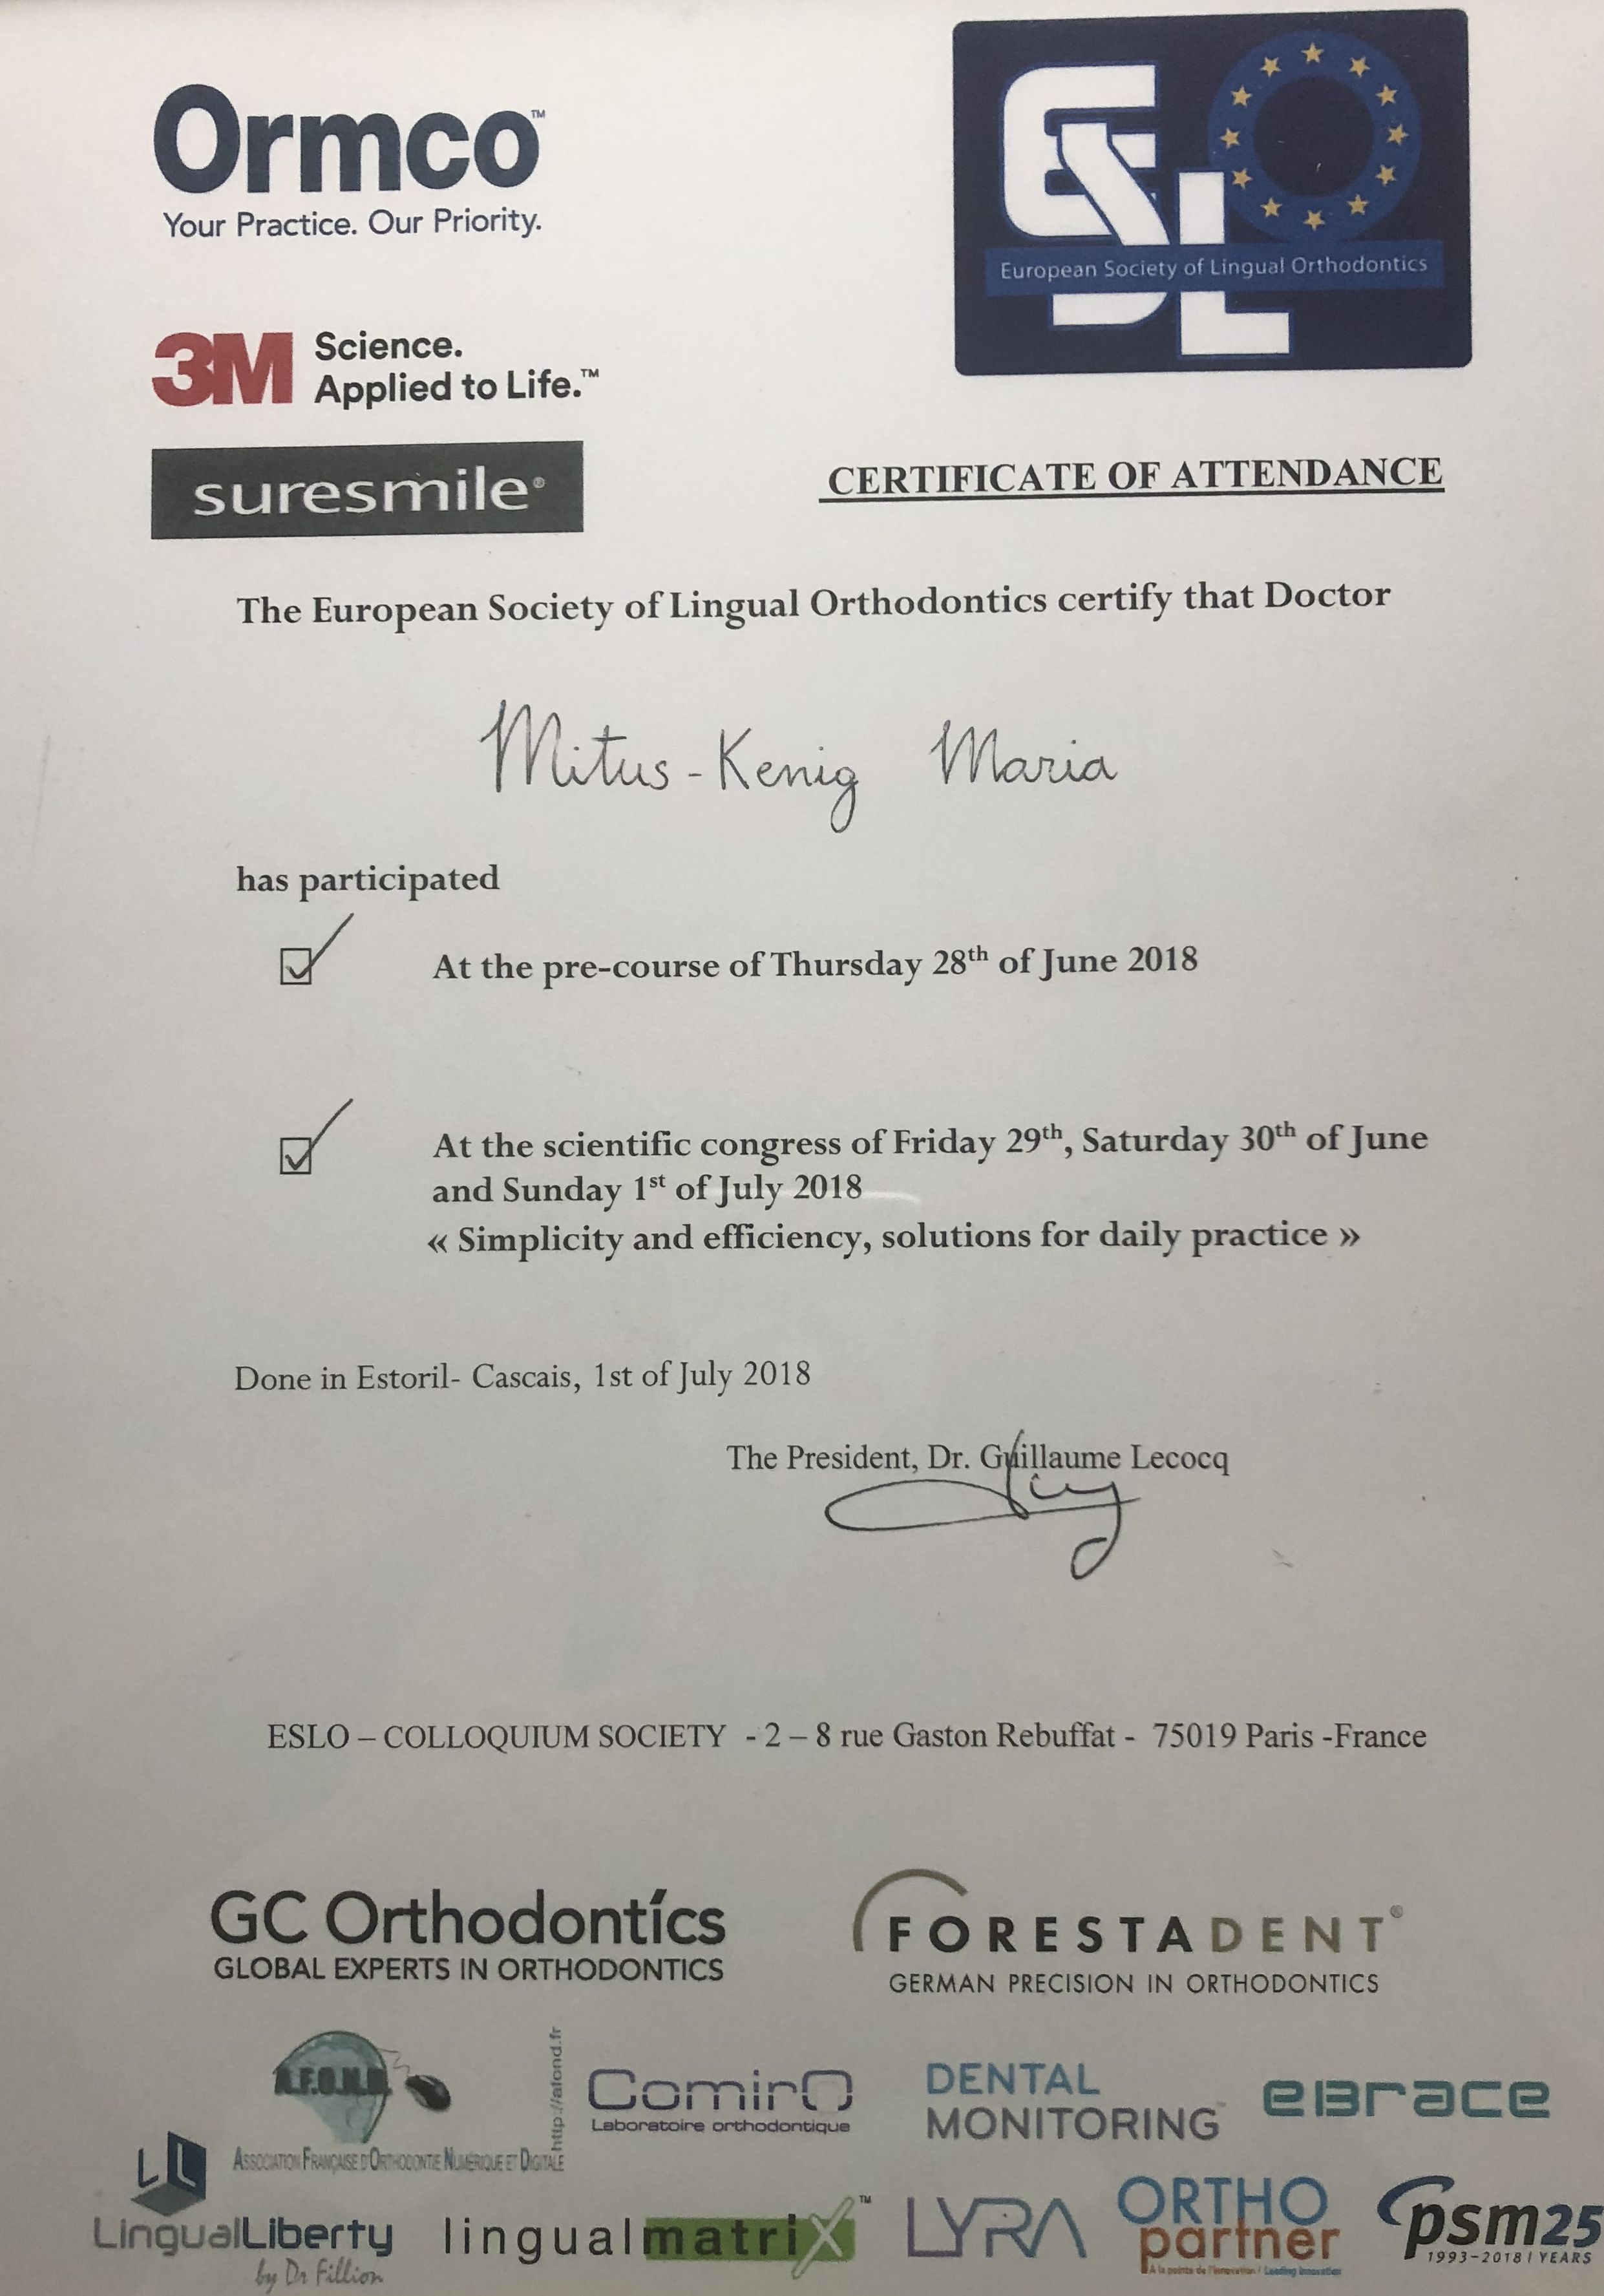 Certificate of attendance at the European Society of Lingual Orthodontics